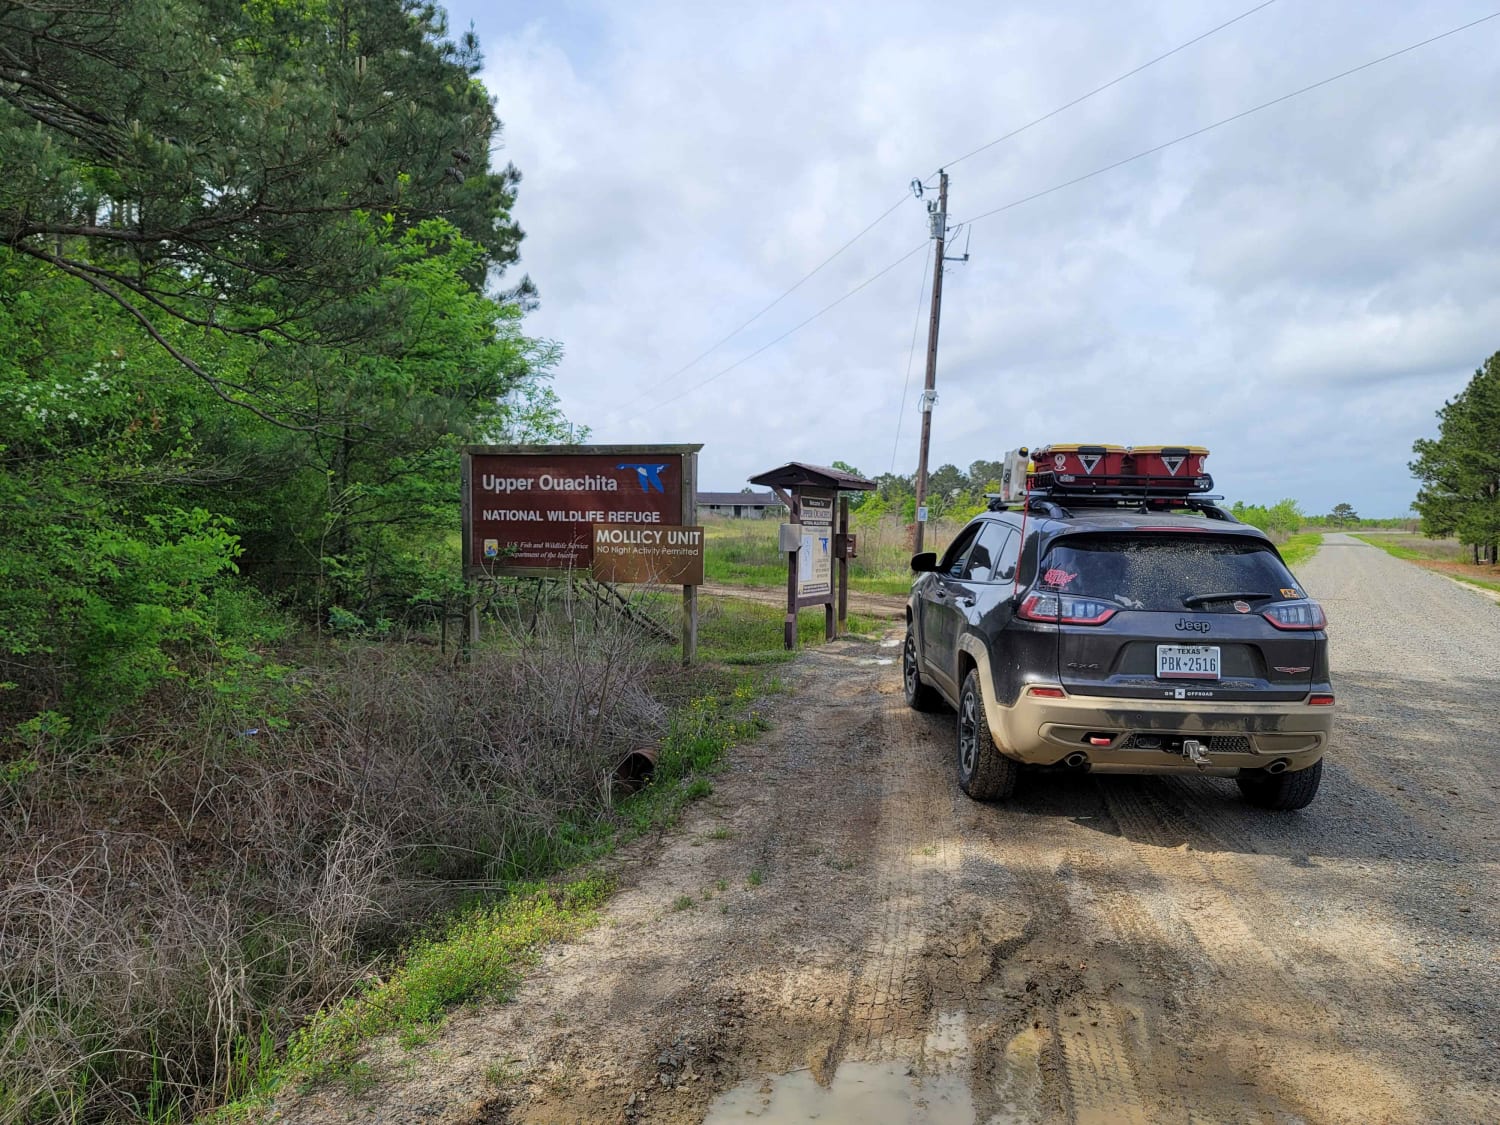 The Arkansas Overland Route - TrailHawk Loop - Section 23